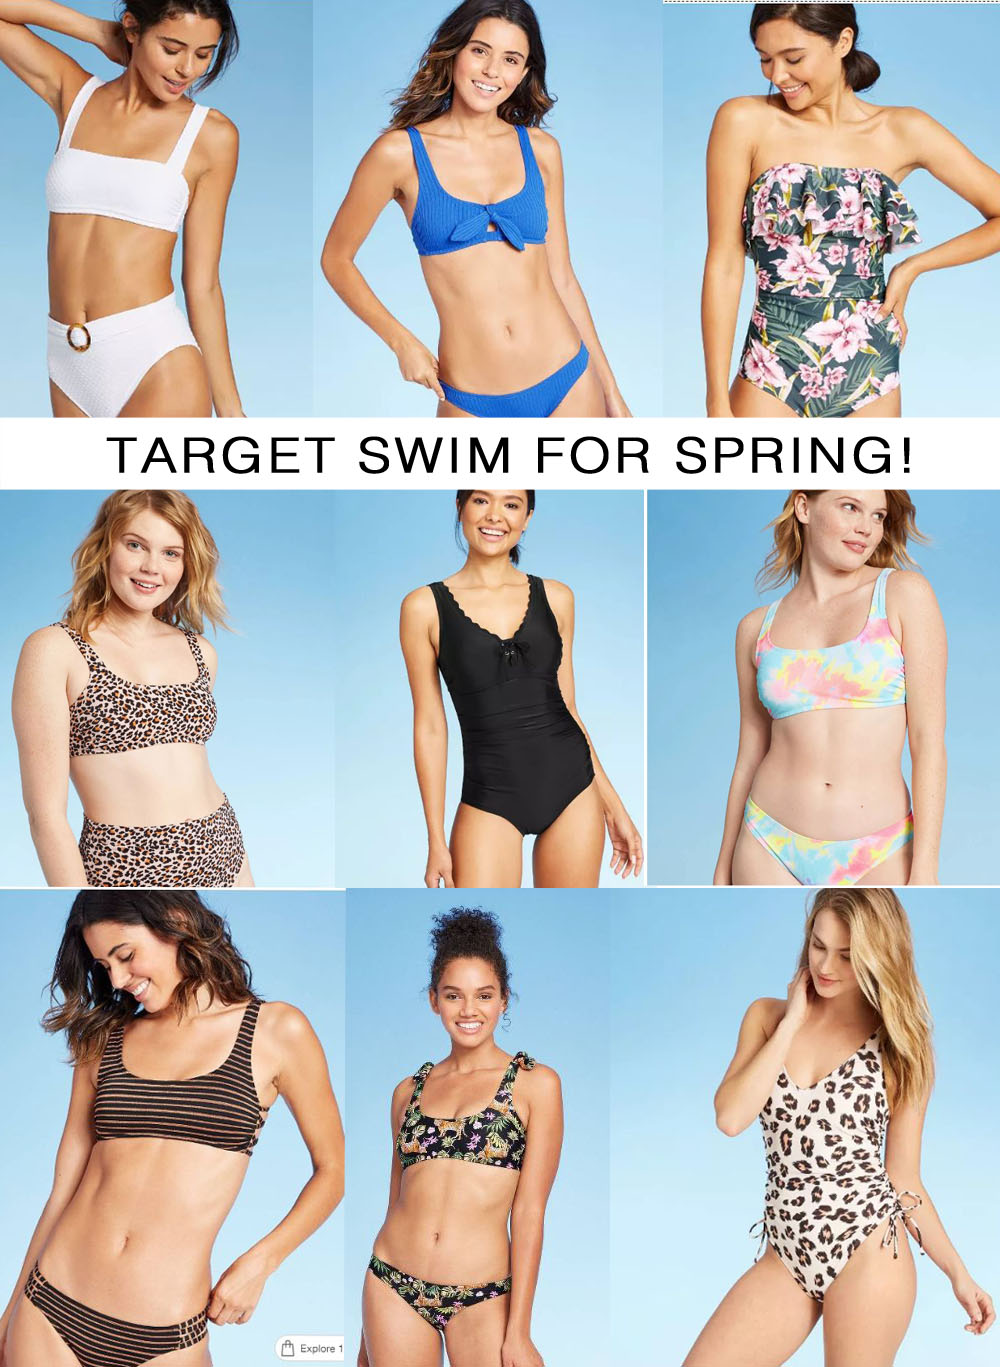 Target Swimsuits on Sale by popular Florida life and style blog, The Modern Savvy: collage image of various Target swimsuits that are currently on sale.